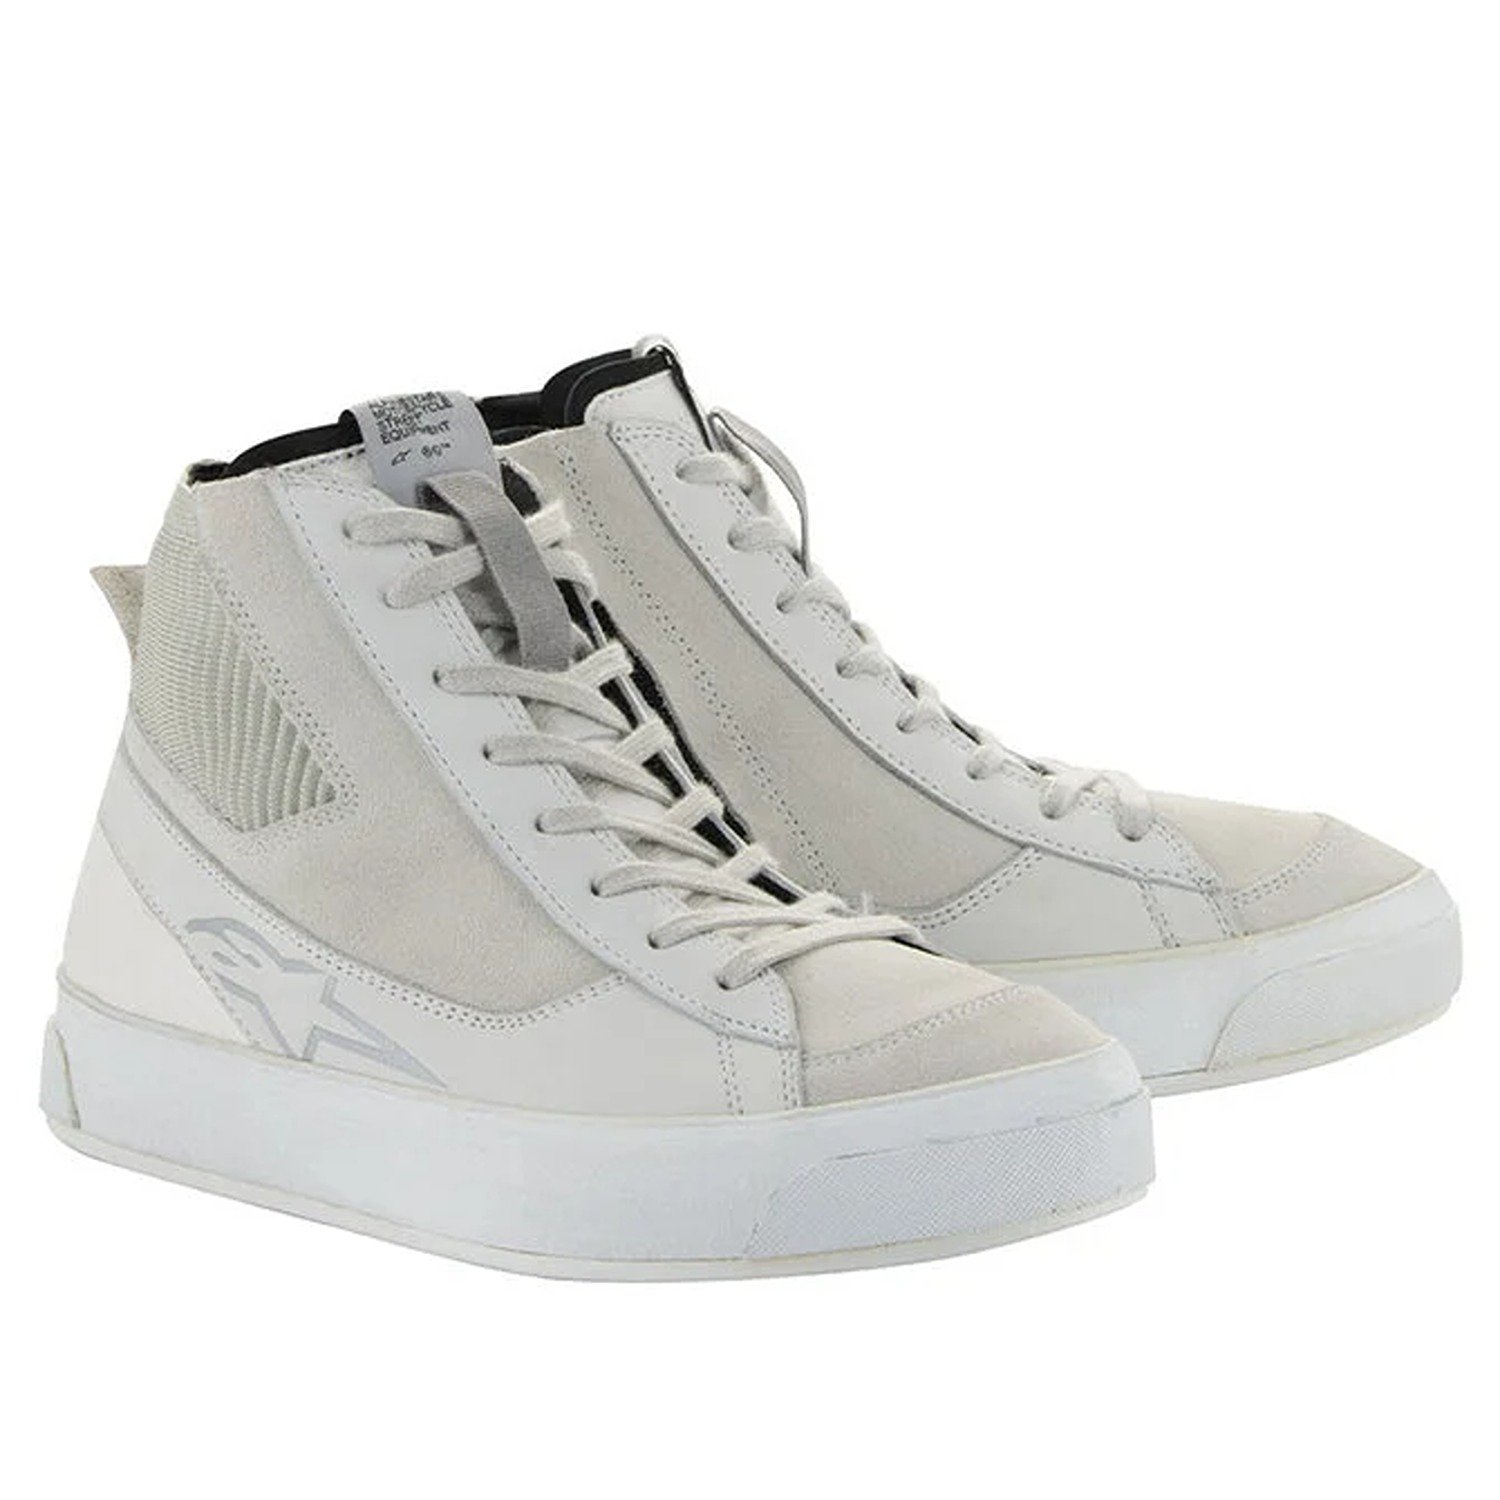 Image of Alpinestars Stella Stated Podium Shoes White Cool Gray Taille US 115